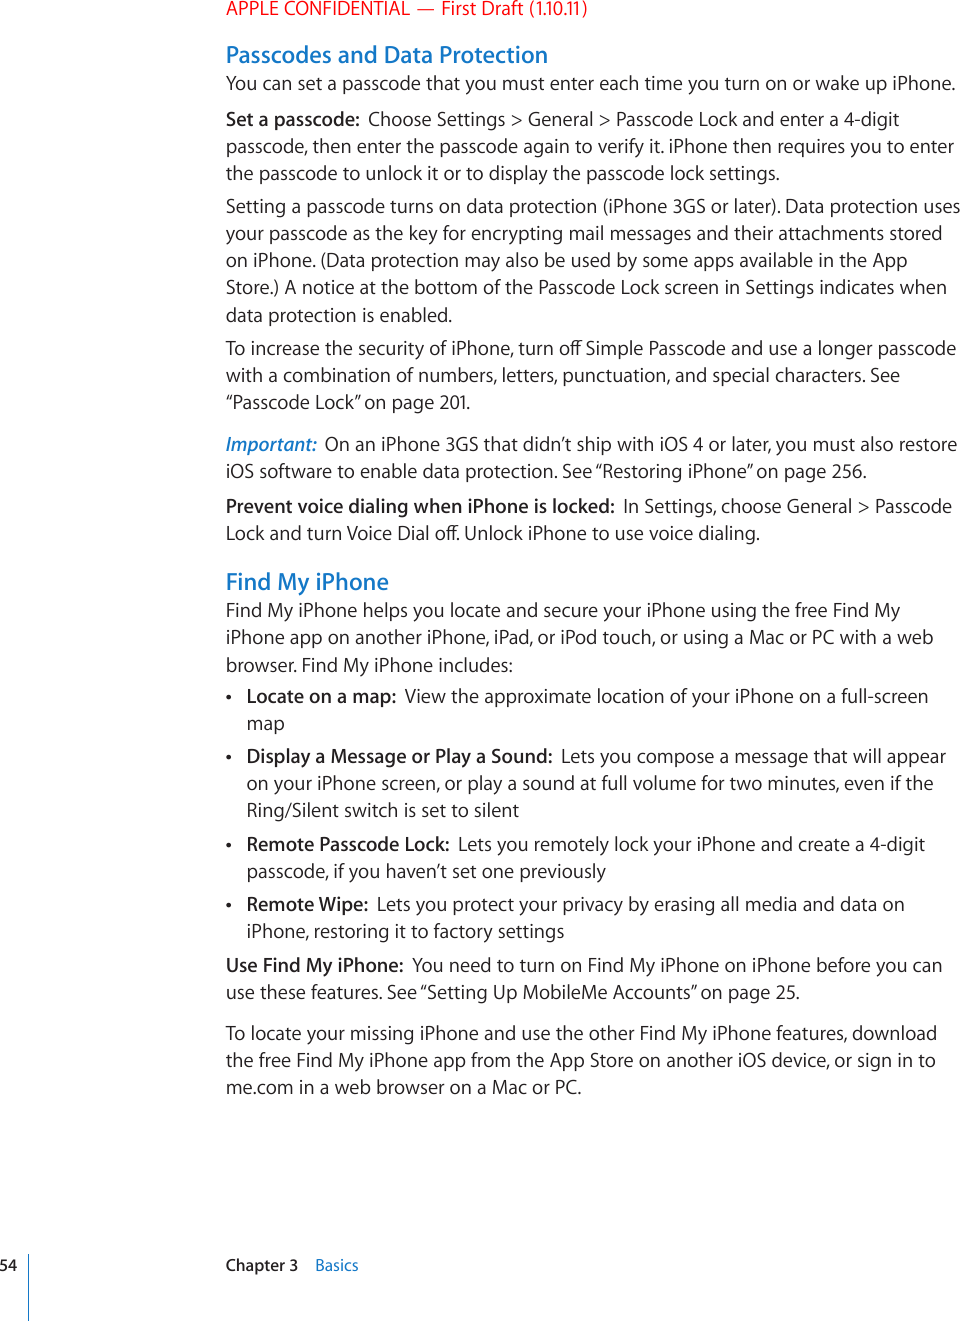 APPLE CONFIDENTIAL — First Draft (1.10.11)Passcodes and Data ProtectionYou can set a passcode that you must enter each time you turn on or wake up iPhone.Set a passcode:  Choose Settings &gt; General &gt; Passcode Lock and enter a 4-digit passcode, then enter the passcode again to verify it. iPhone then requires you to enter the passcode to unlock it or to display the passcode lock settings.Setting a passcode turns on data protection (iPhone 3GS or later). Data protection uses your passcode as the key for encrypting mail messages and their attachments stored on iPhone. (Data protection may also be used by some apps available in the App Store.) A notice at the bottom of the Passcode Lock screen in Settings indicates when data protection is enabled.6QKPETGCUGVJGUGEWTKV[QHK2JQPGVWTPQÒ5KORNG2CUUEQFGCPFWUGCNQPIGTRCUUEQFGwith a combination of numbers, letters, punctuation, and special characters. See “Passcode Lock” on page 201.Important:  On an iPhone 3GS that didn’t ship with iOS 4 or later, you must also restore iOS software to enable data protection. See “Restoring iPhone” on page 256.Prevent voice dialing when iPhone is locked:  In Settings, choose General &gt; Passcode .QEMCPFVWTP8QKEG&amp;KCNQÒ7PNQEMK2JQPGVQWUGXQKEGFKCNKPIFind My iPhoneFind My iPhone helps you locate and secure your iPhone using the free Find My iPhone app on another iPhone, iPad, or iPod touch, or using a Mac or PC with a web browser. Find My iPhone includes: Locate on a map:  View the approximate location of your iPhone on a full-screen map Display a Message or Play a Sound:  Lets you compose a message that will appear on your iPhone screen, or play a sound at full volume for two minutes, even if the Ring/Silent switch is set to silent Remote Passcode Lock:  Lets you remotely lock your iPhone and create a 4-digit passcode, if you haven’t set one previously Remote Wipe:  Lets you protect your privacy by erasing all media and data on iPhone, restoring it to factory settingsUse Find My iPhone:  You need to turn on Find My iPhone on iPhone before you can use these features. See “Setting Up MobileMe Accounts” on page 25.To locate your missing iPhone and use the other Find My iPhone features, download the free Find My iPhone app from the App Store on another iOS device, or sign in to me.com in a web browser on a Mac or PC.54 Chapter 3    Basics